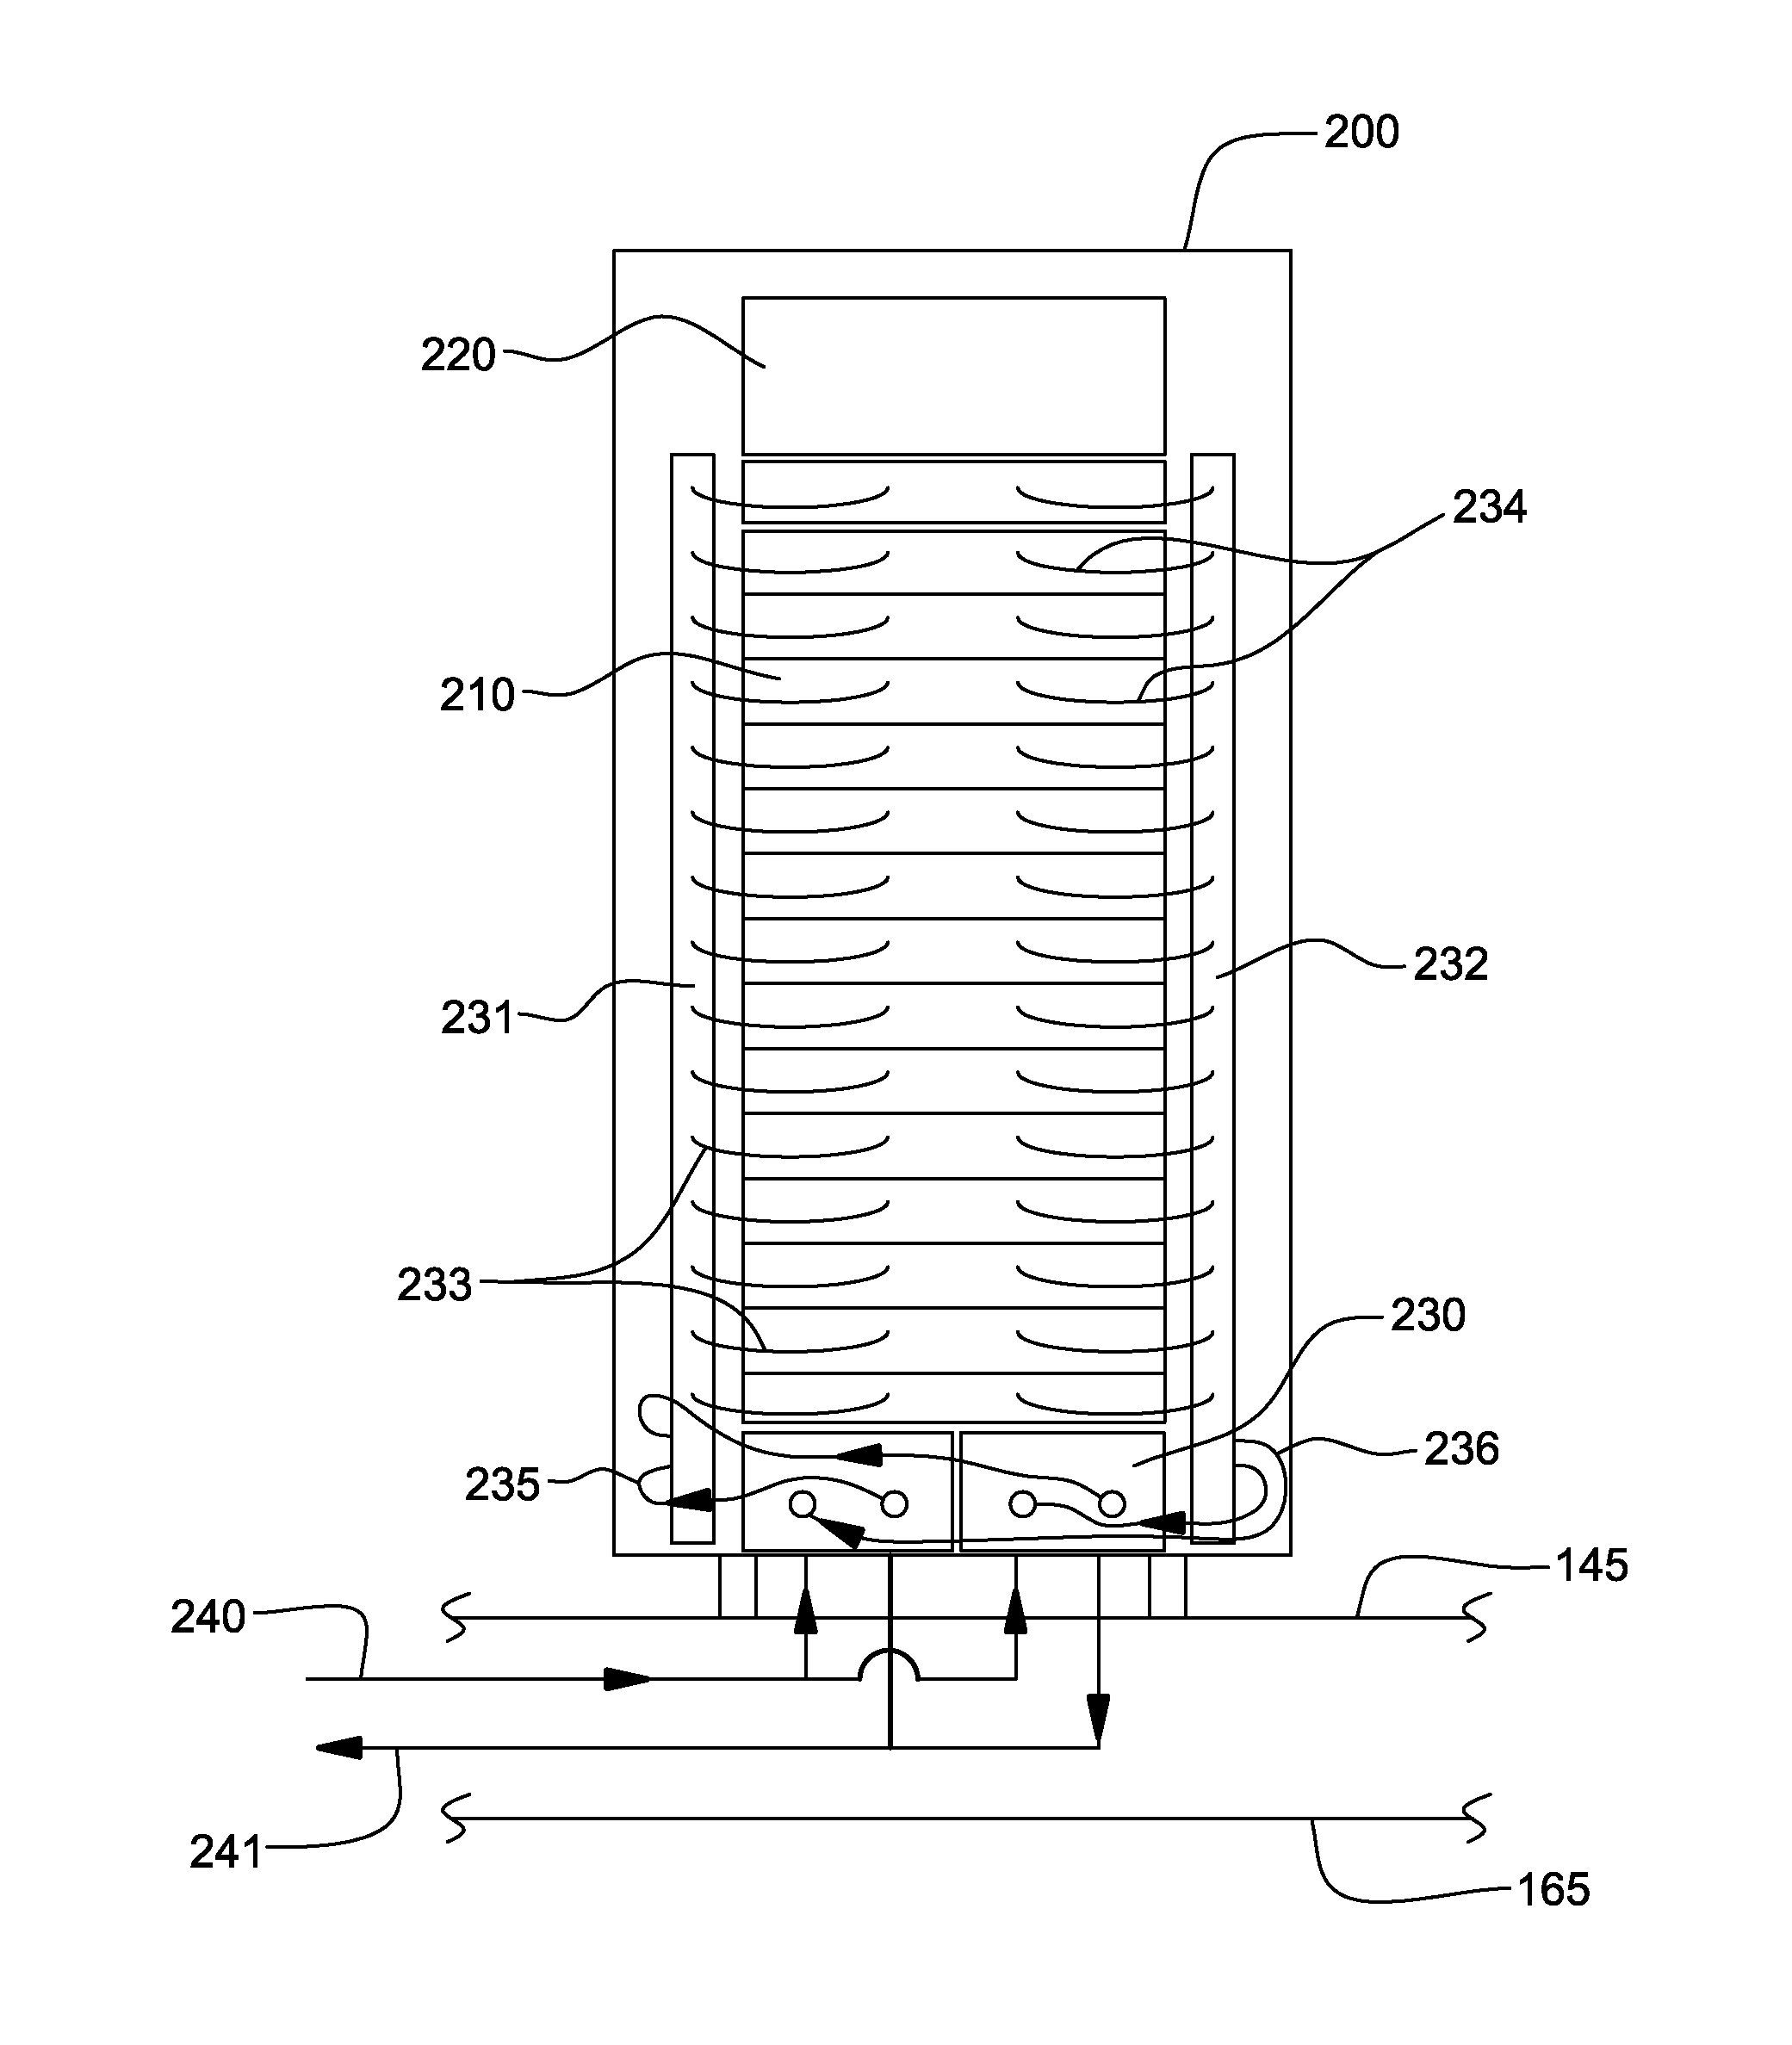 Interleaved, immersion-cooling apparatus and method for an electronic subsystem of an electronics rack